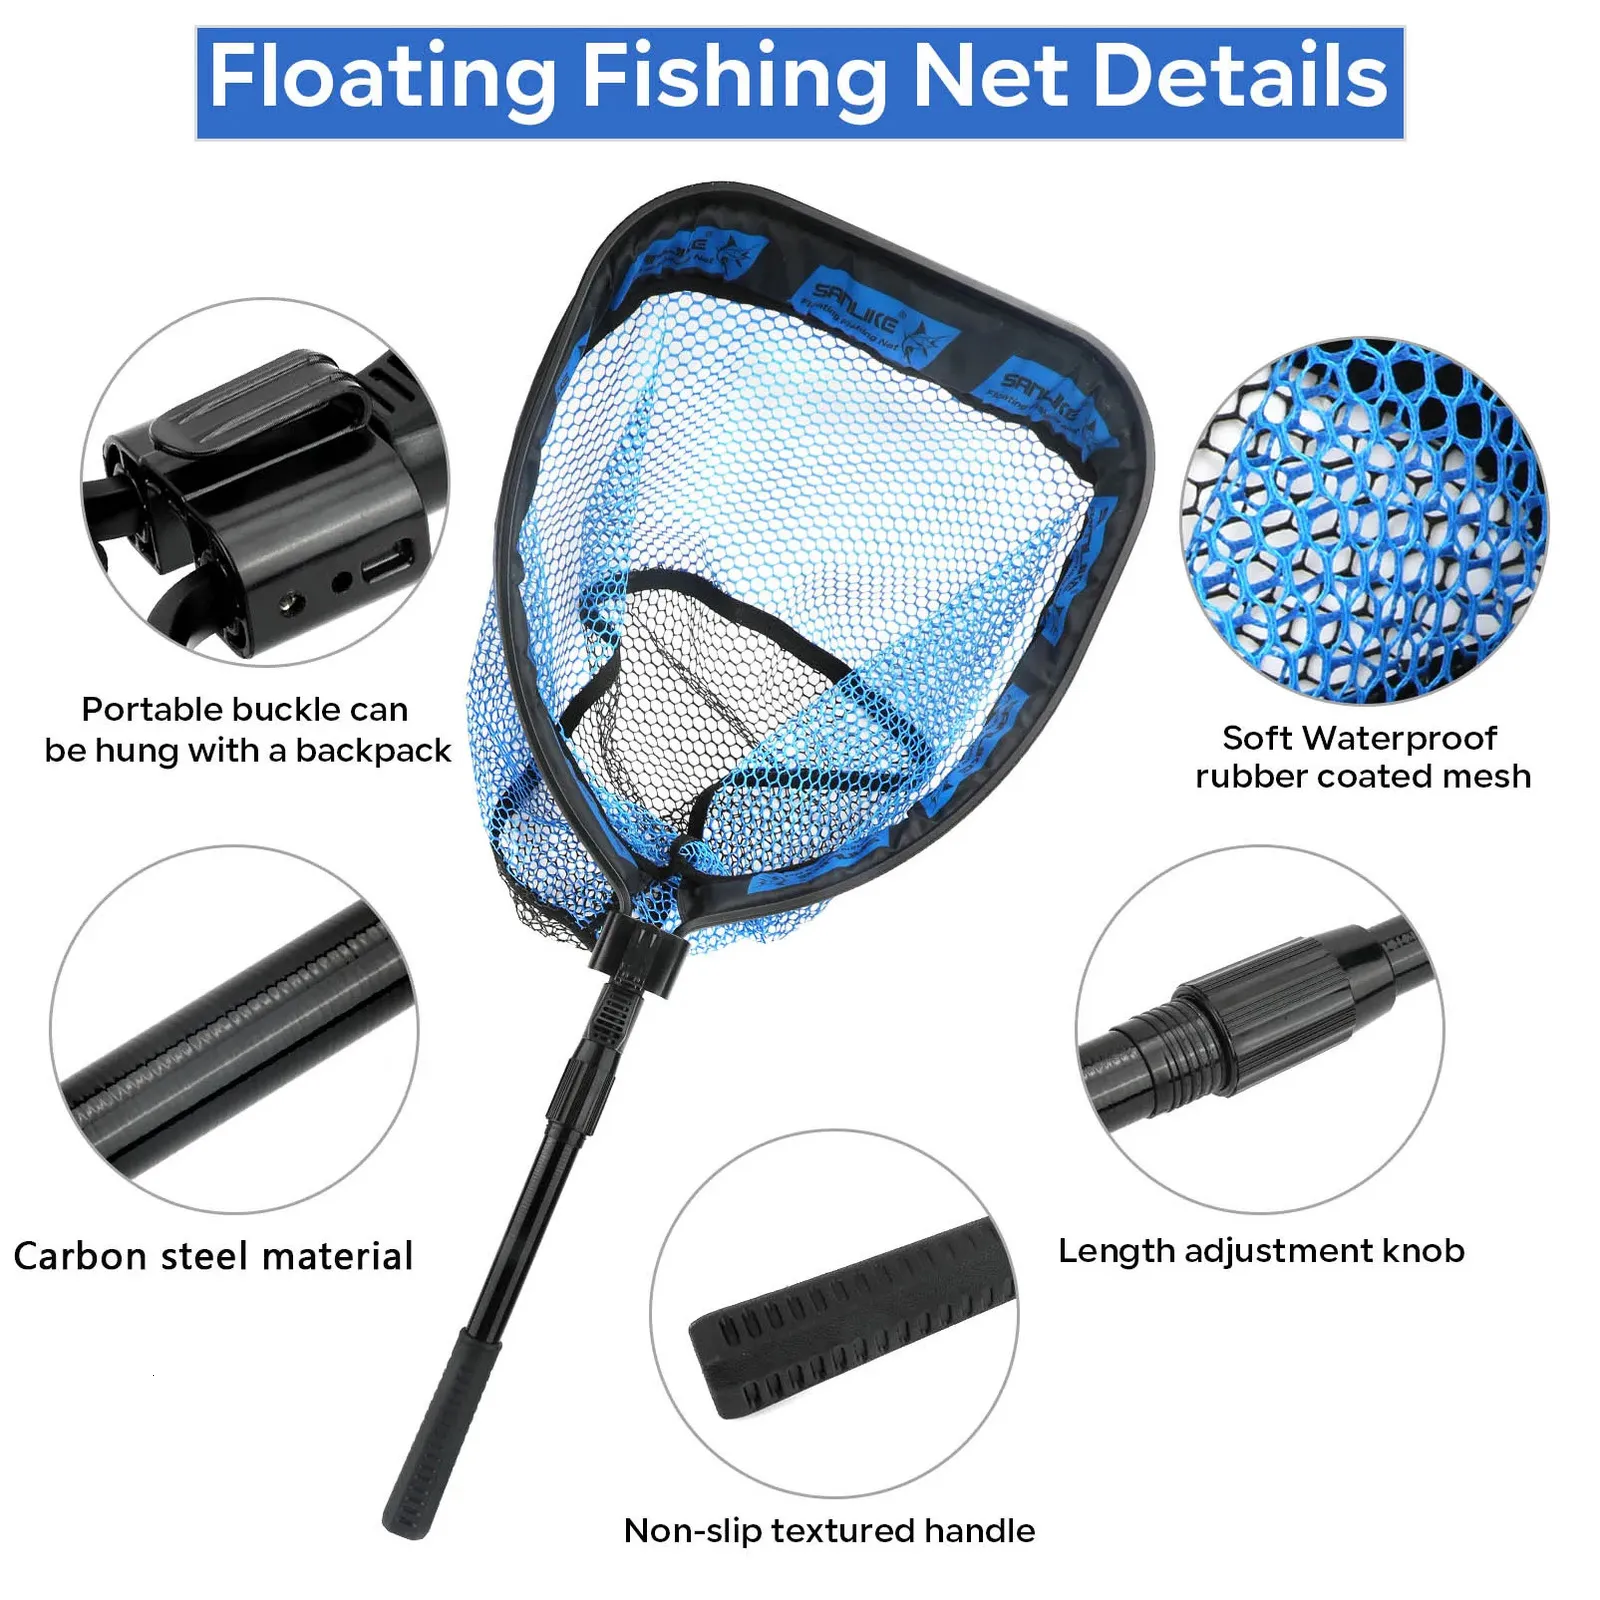 SANLIKE Float Fishing Net Carbon Steel Telescoping Foldable Landing  Retractable Pole Equipment Accessories 240116 From Heng05, $22.87